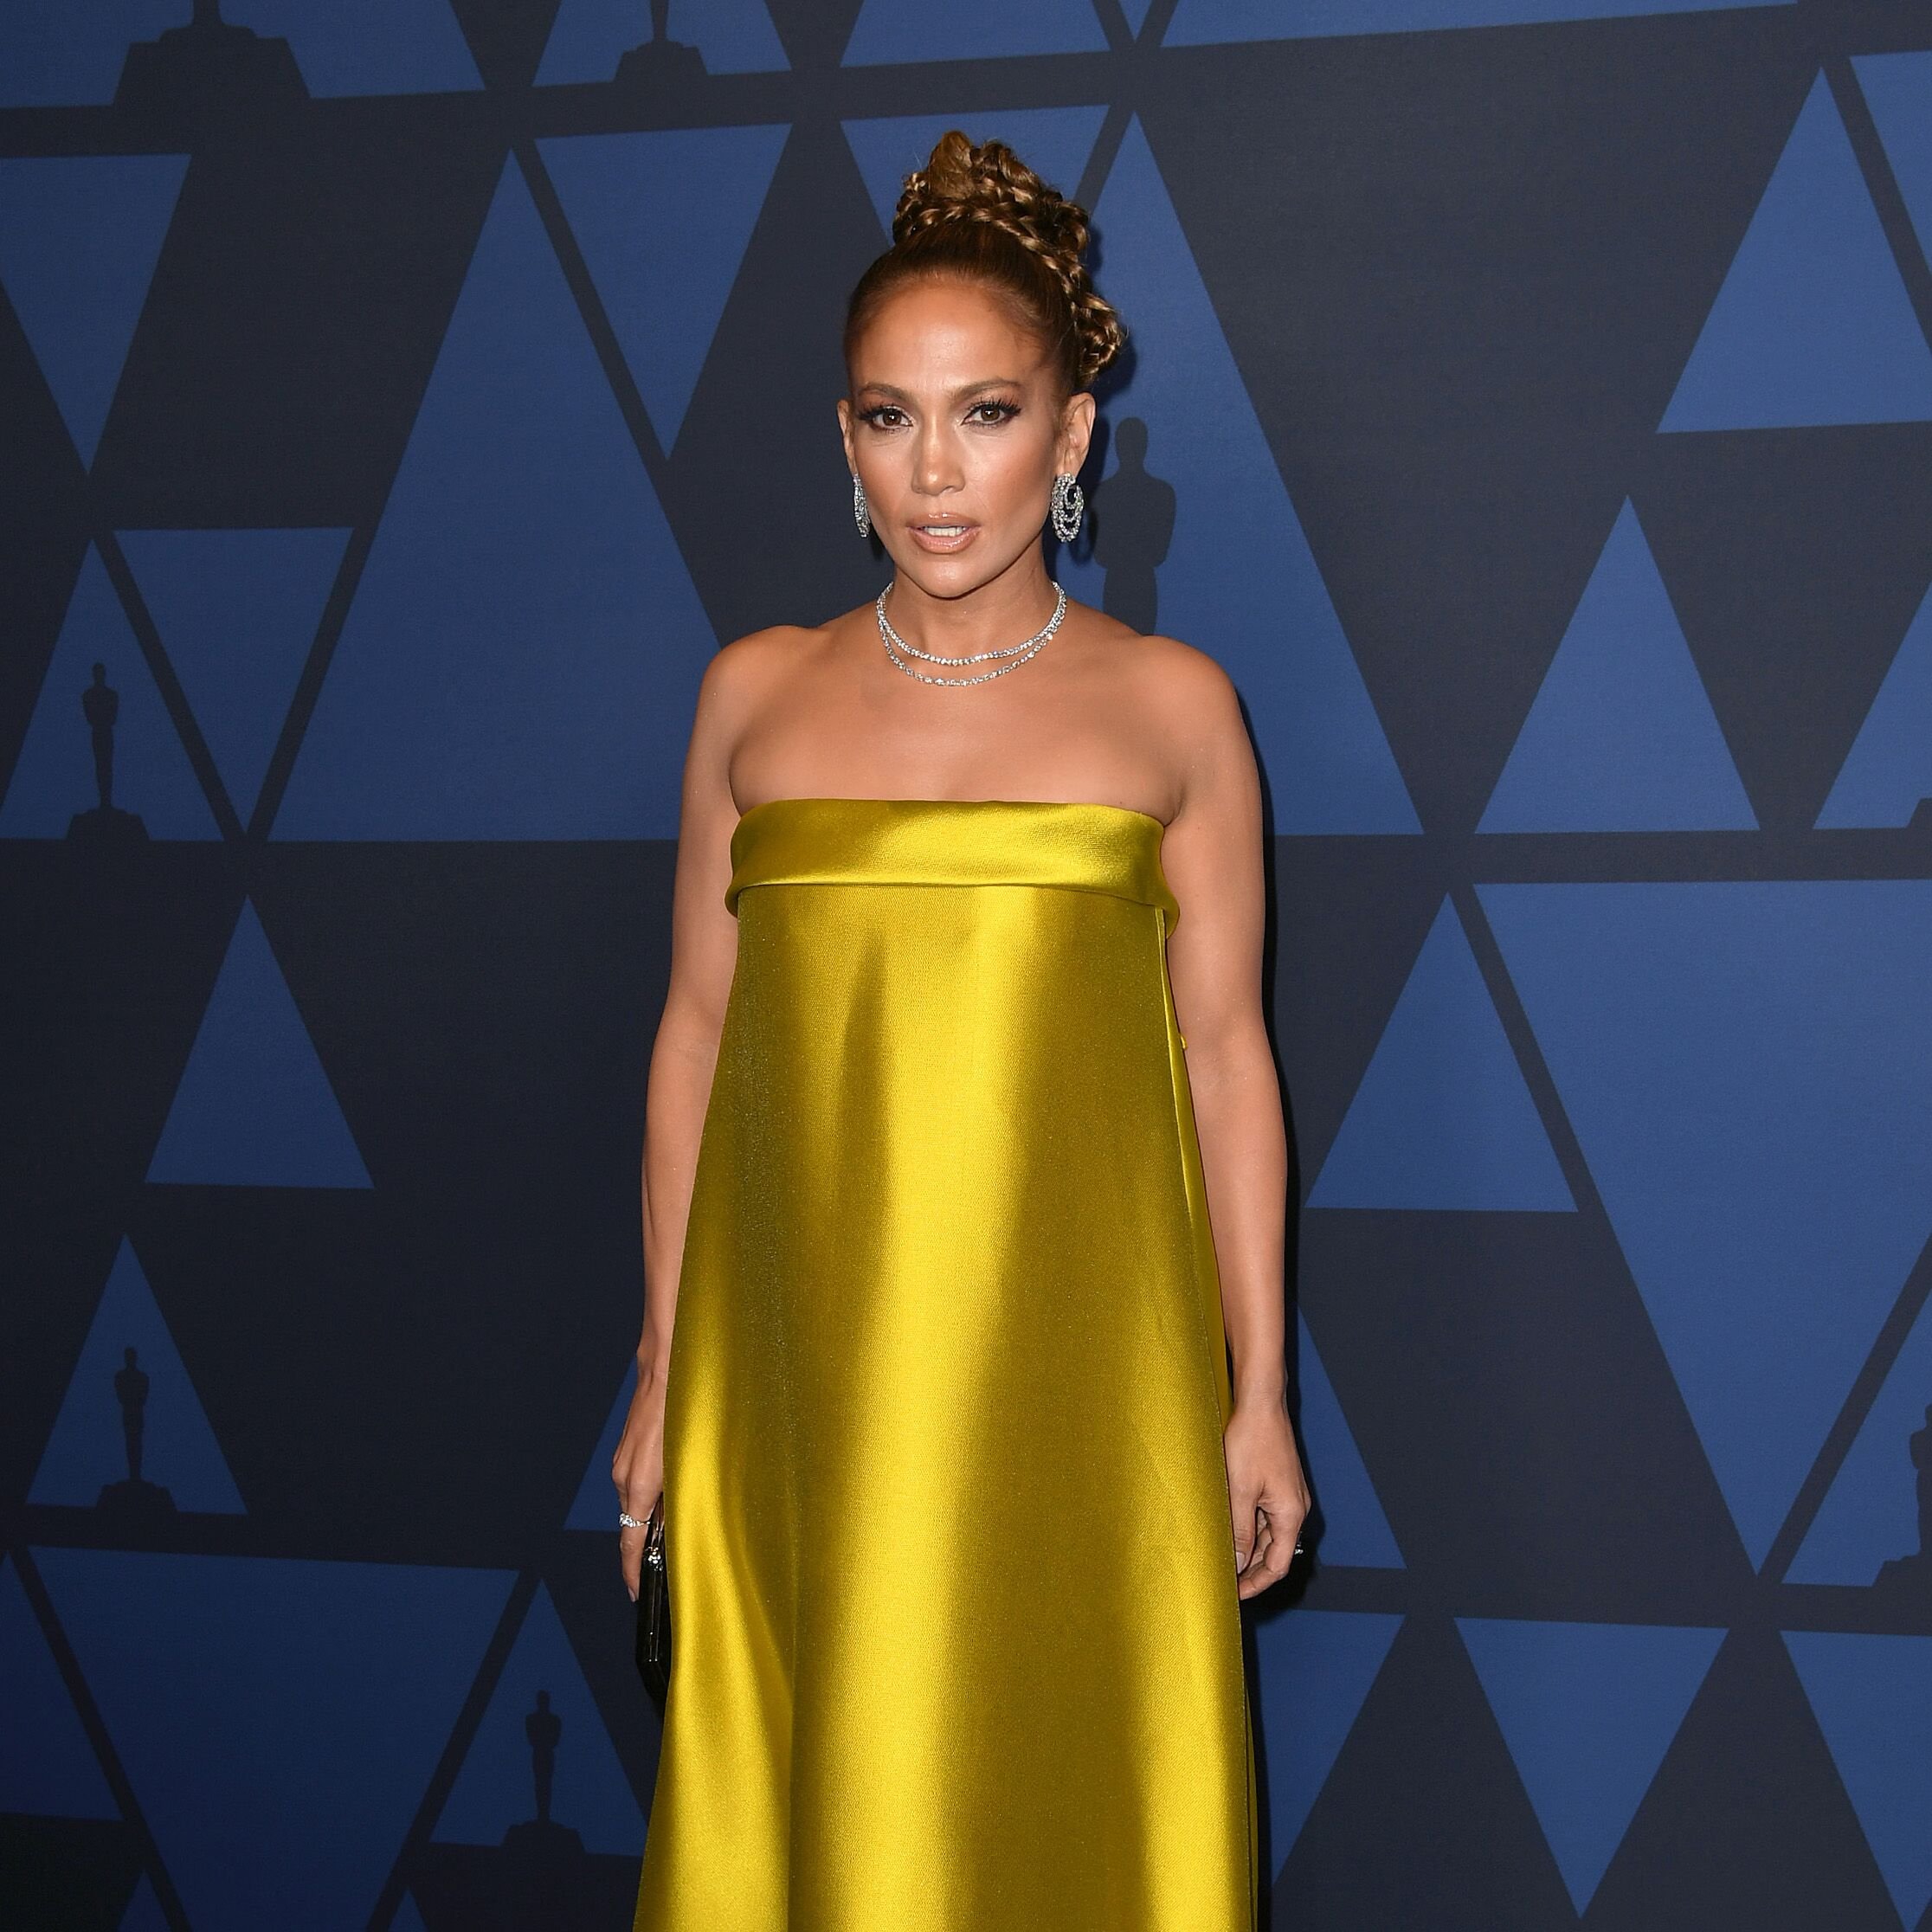 Jennifer Lopez at the Academy Of Motion Picture Arts And Sciences' 11th Annual Governors Awards on October 27, 2019, in Hollywood, California | Photo: Kevin Winter/Getty Images